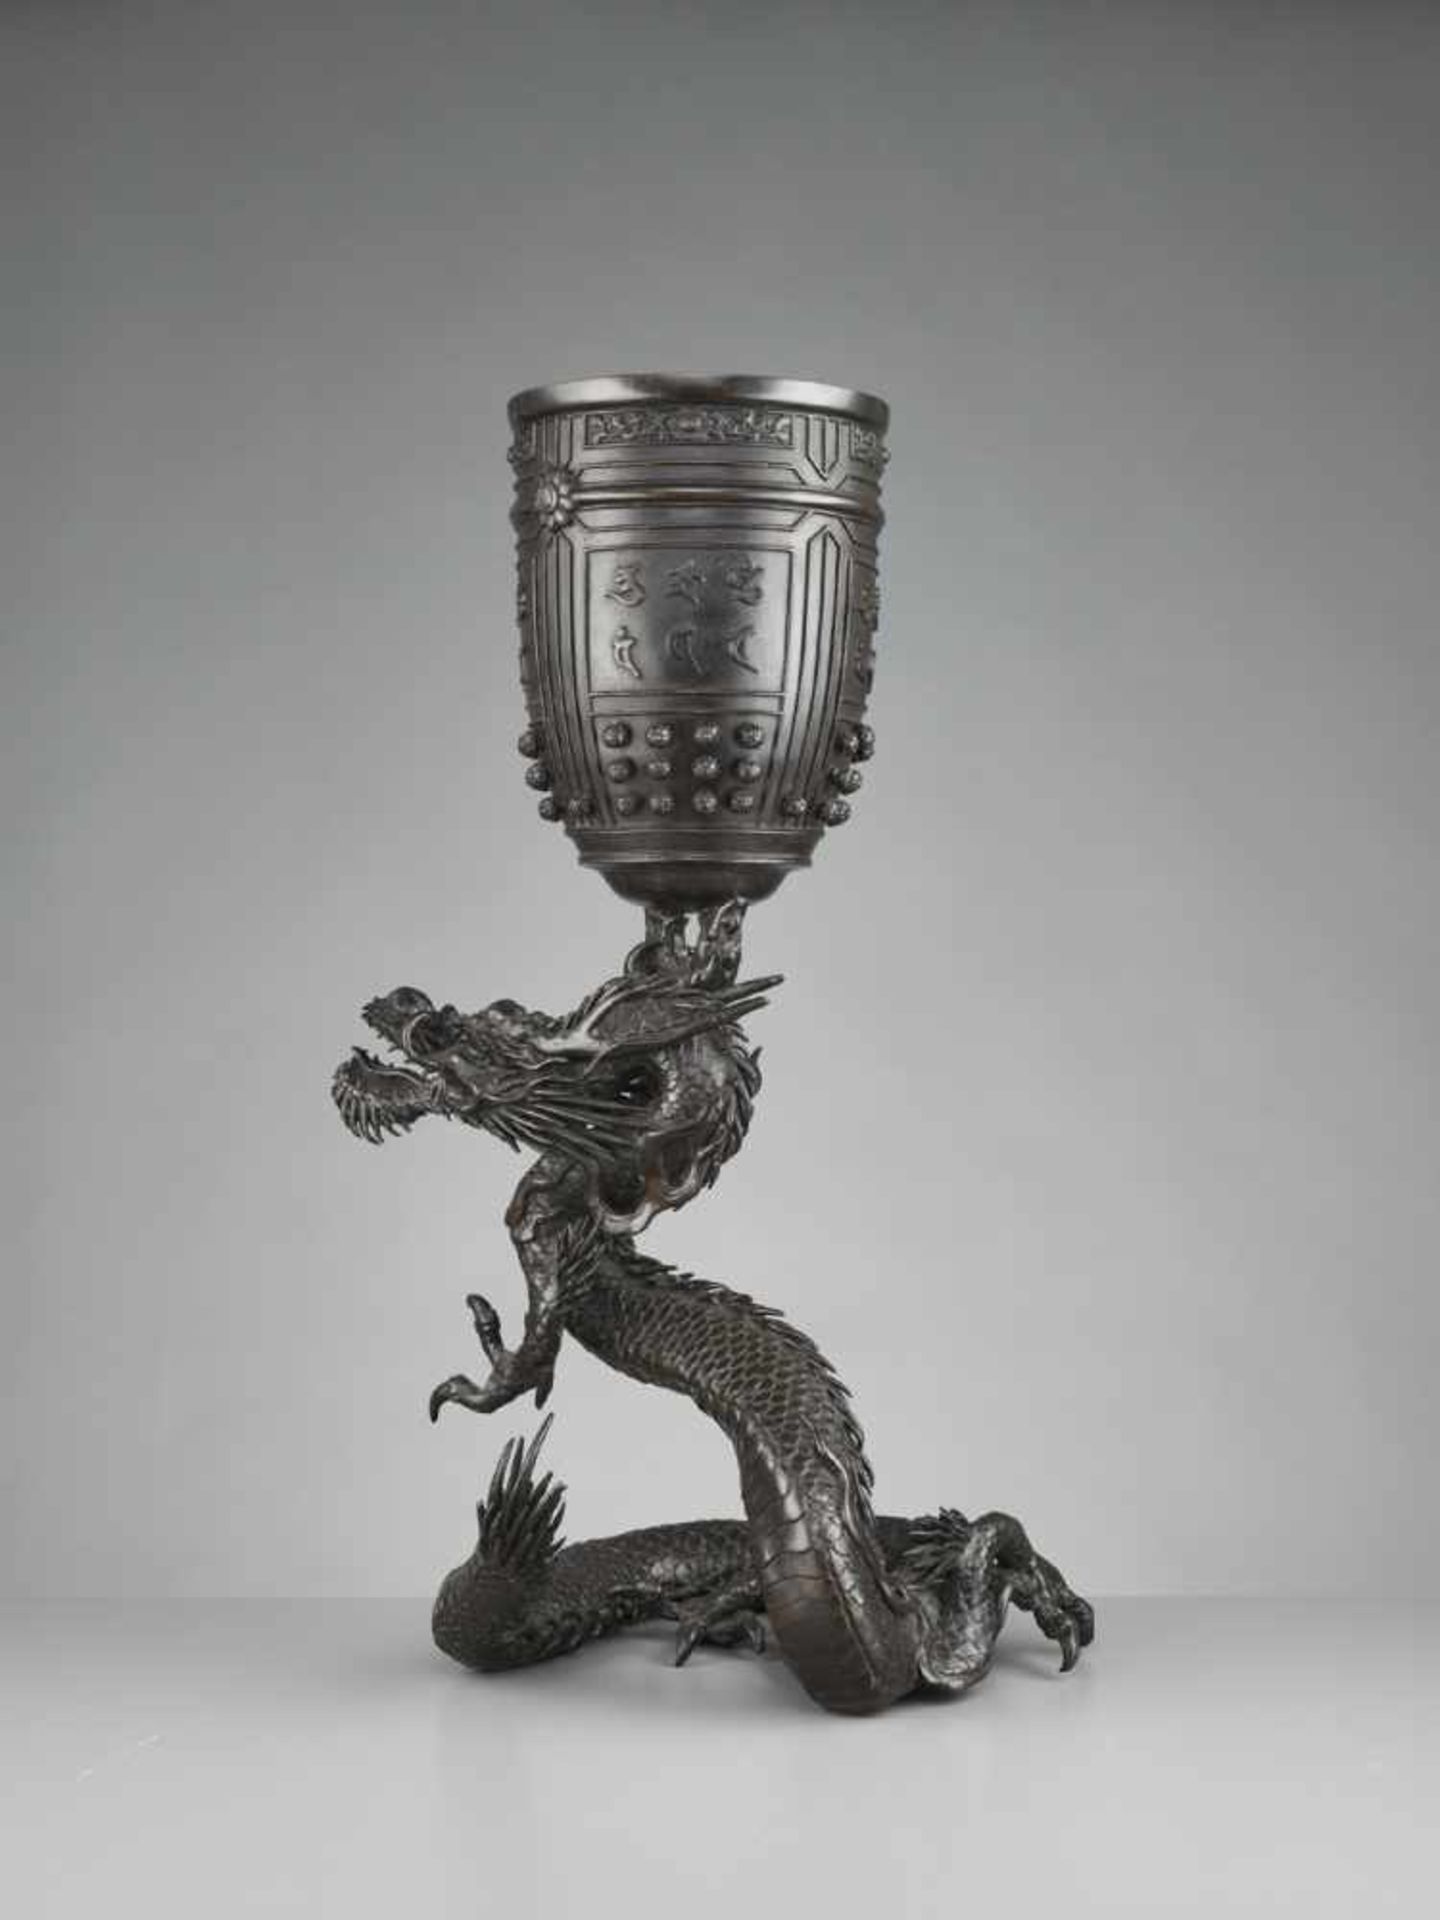 A LARGE AND MASSIVE DRAGON AND TEMPLE BELL BRONZE Japan, 19th century, late Edo period (1615-1868) - Image 8 of 10